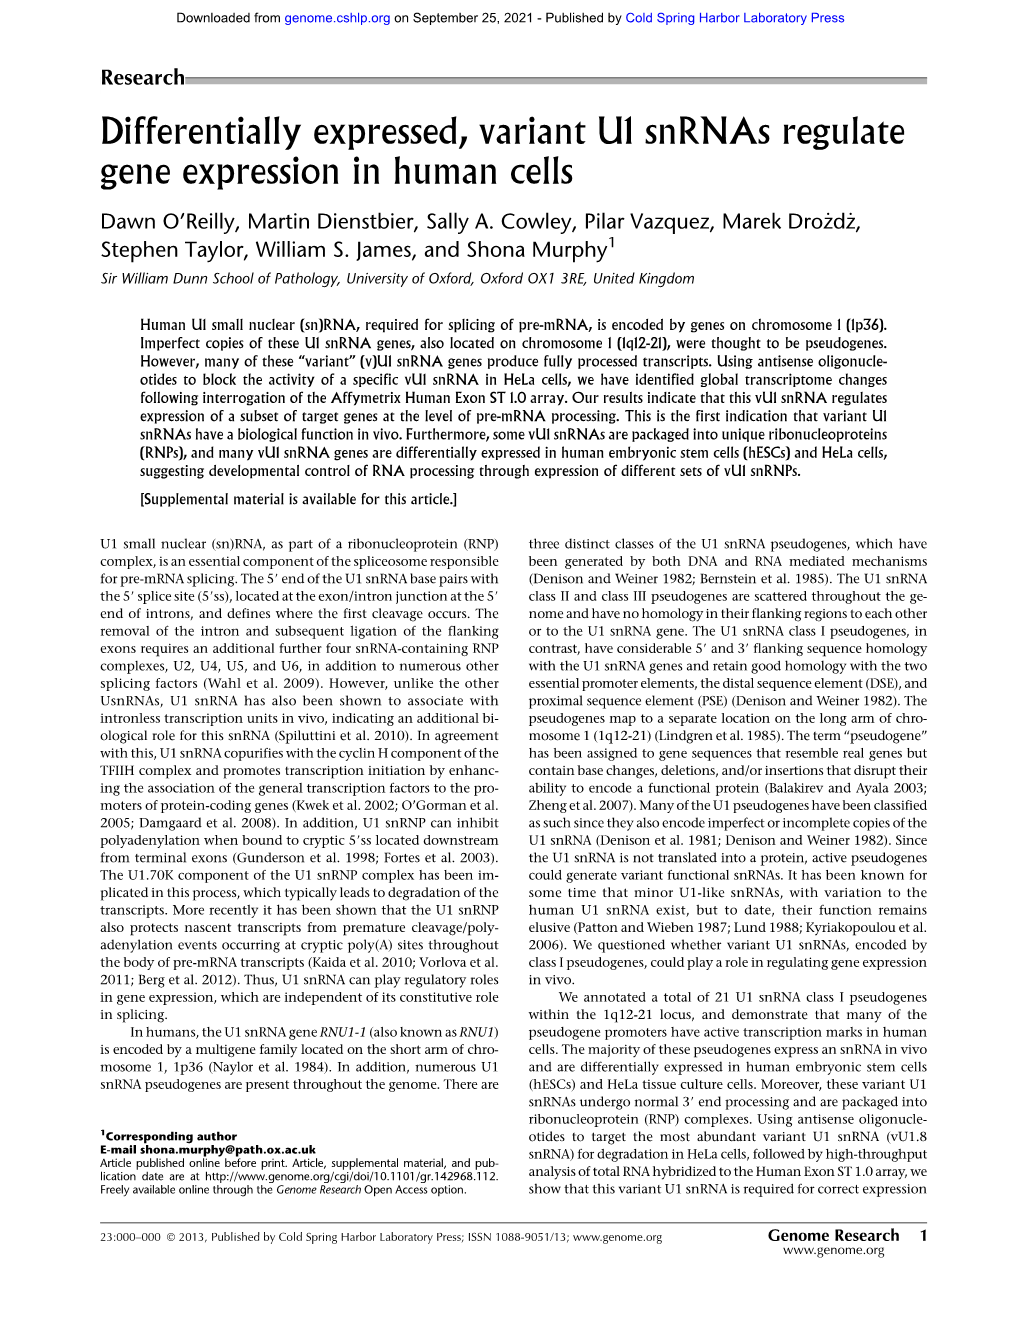 Differentially Expressed, Variant U1 Snrnas Regulate Gene Expression in Human Cells